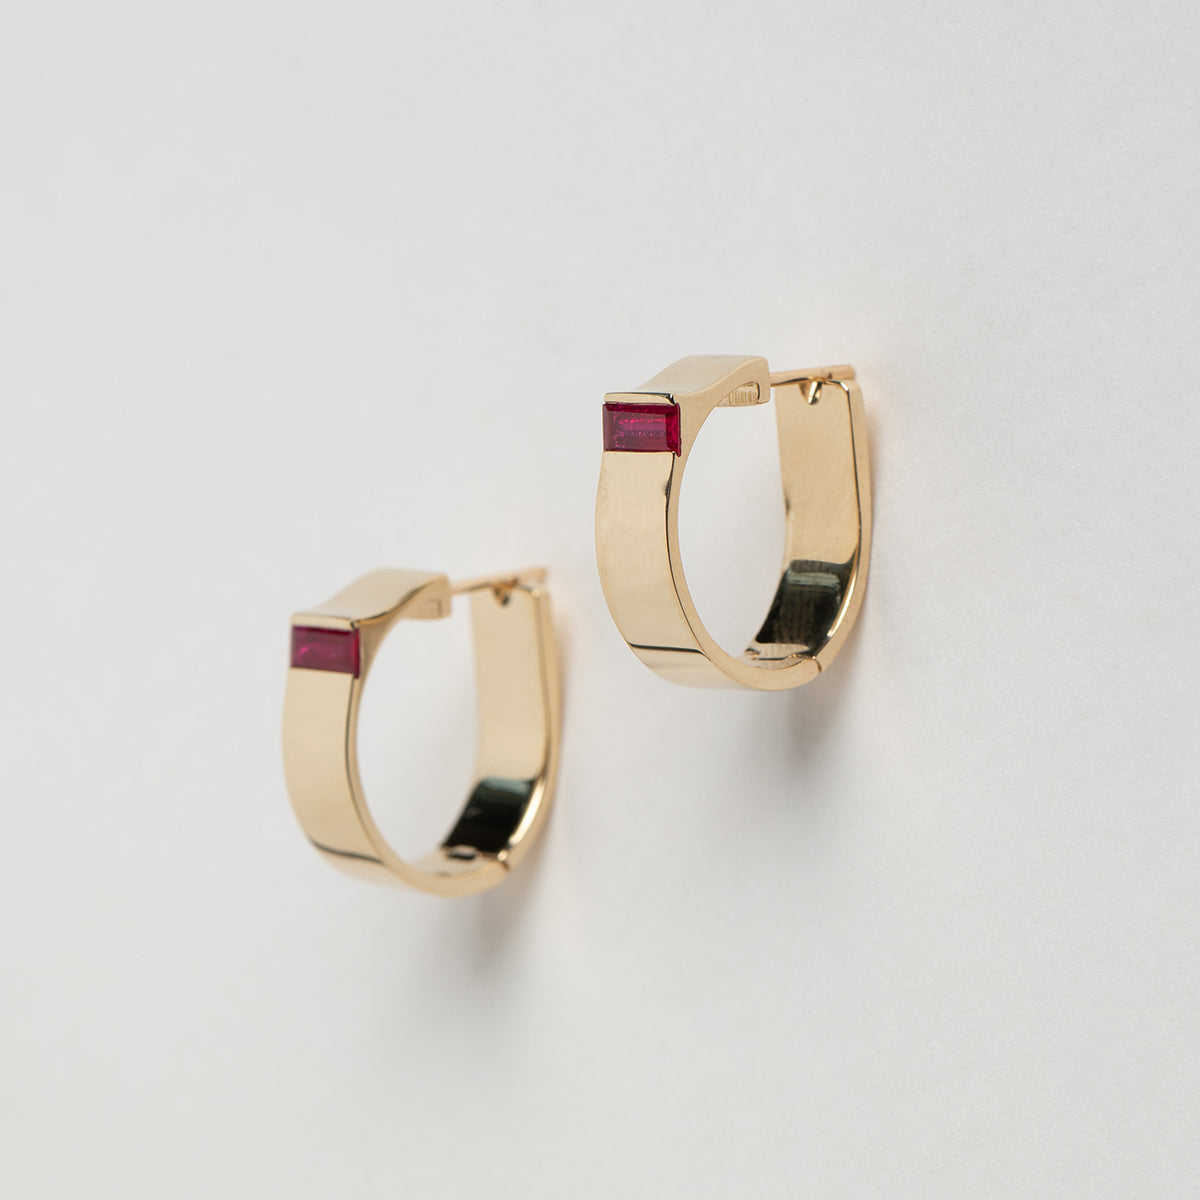 Luxury Braga Hoop Earrings 14 karat yellow gold  with precious ruby gemstones by SHW Fine Jewelry Made in NYC Sustainably